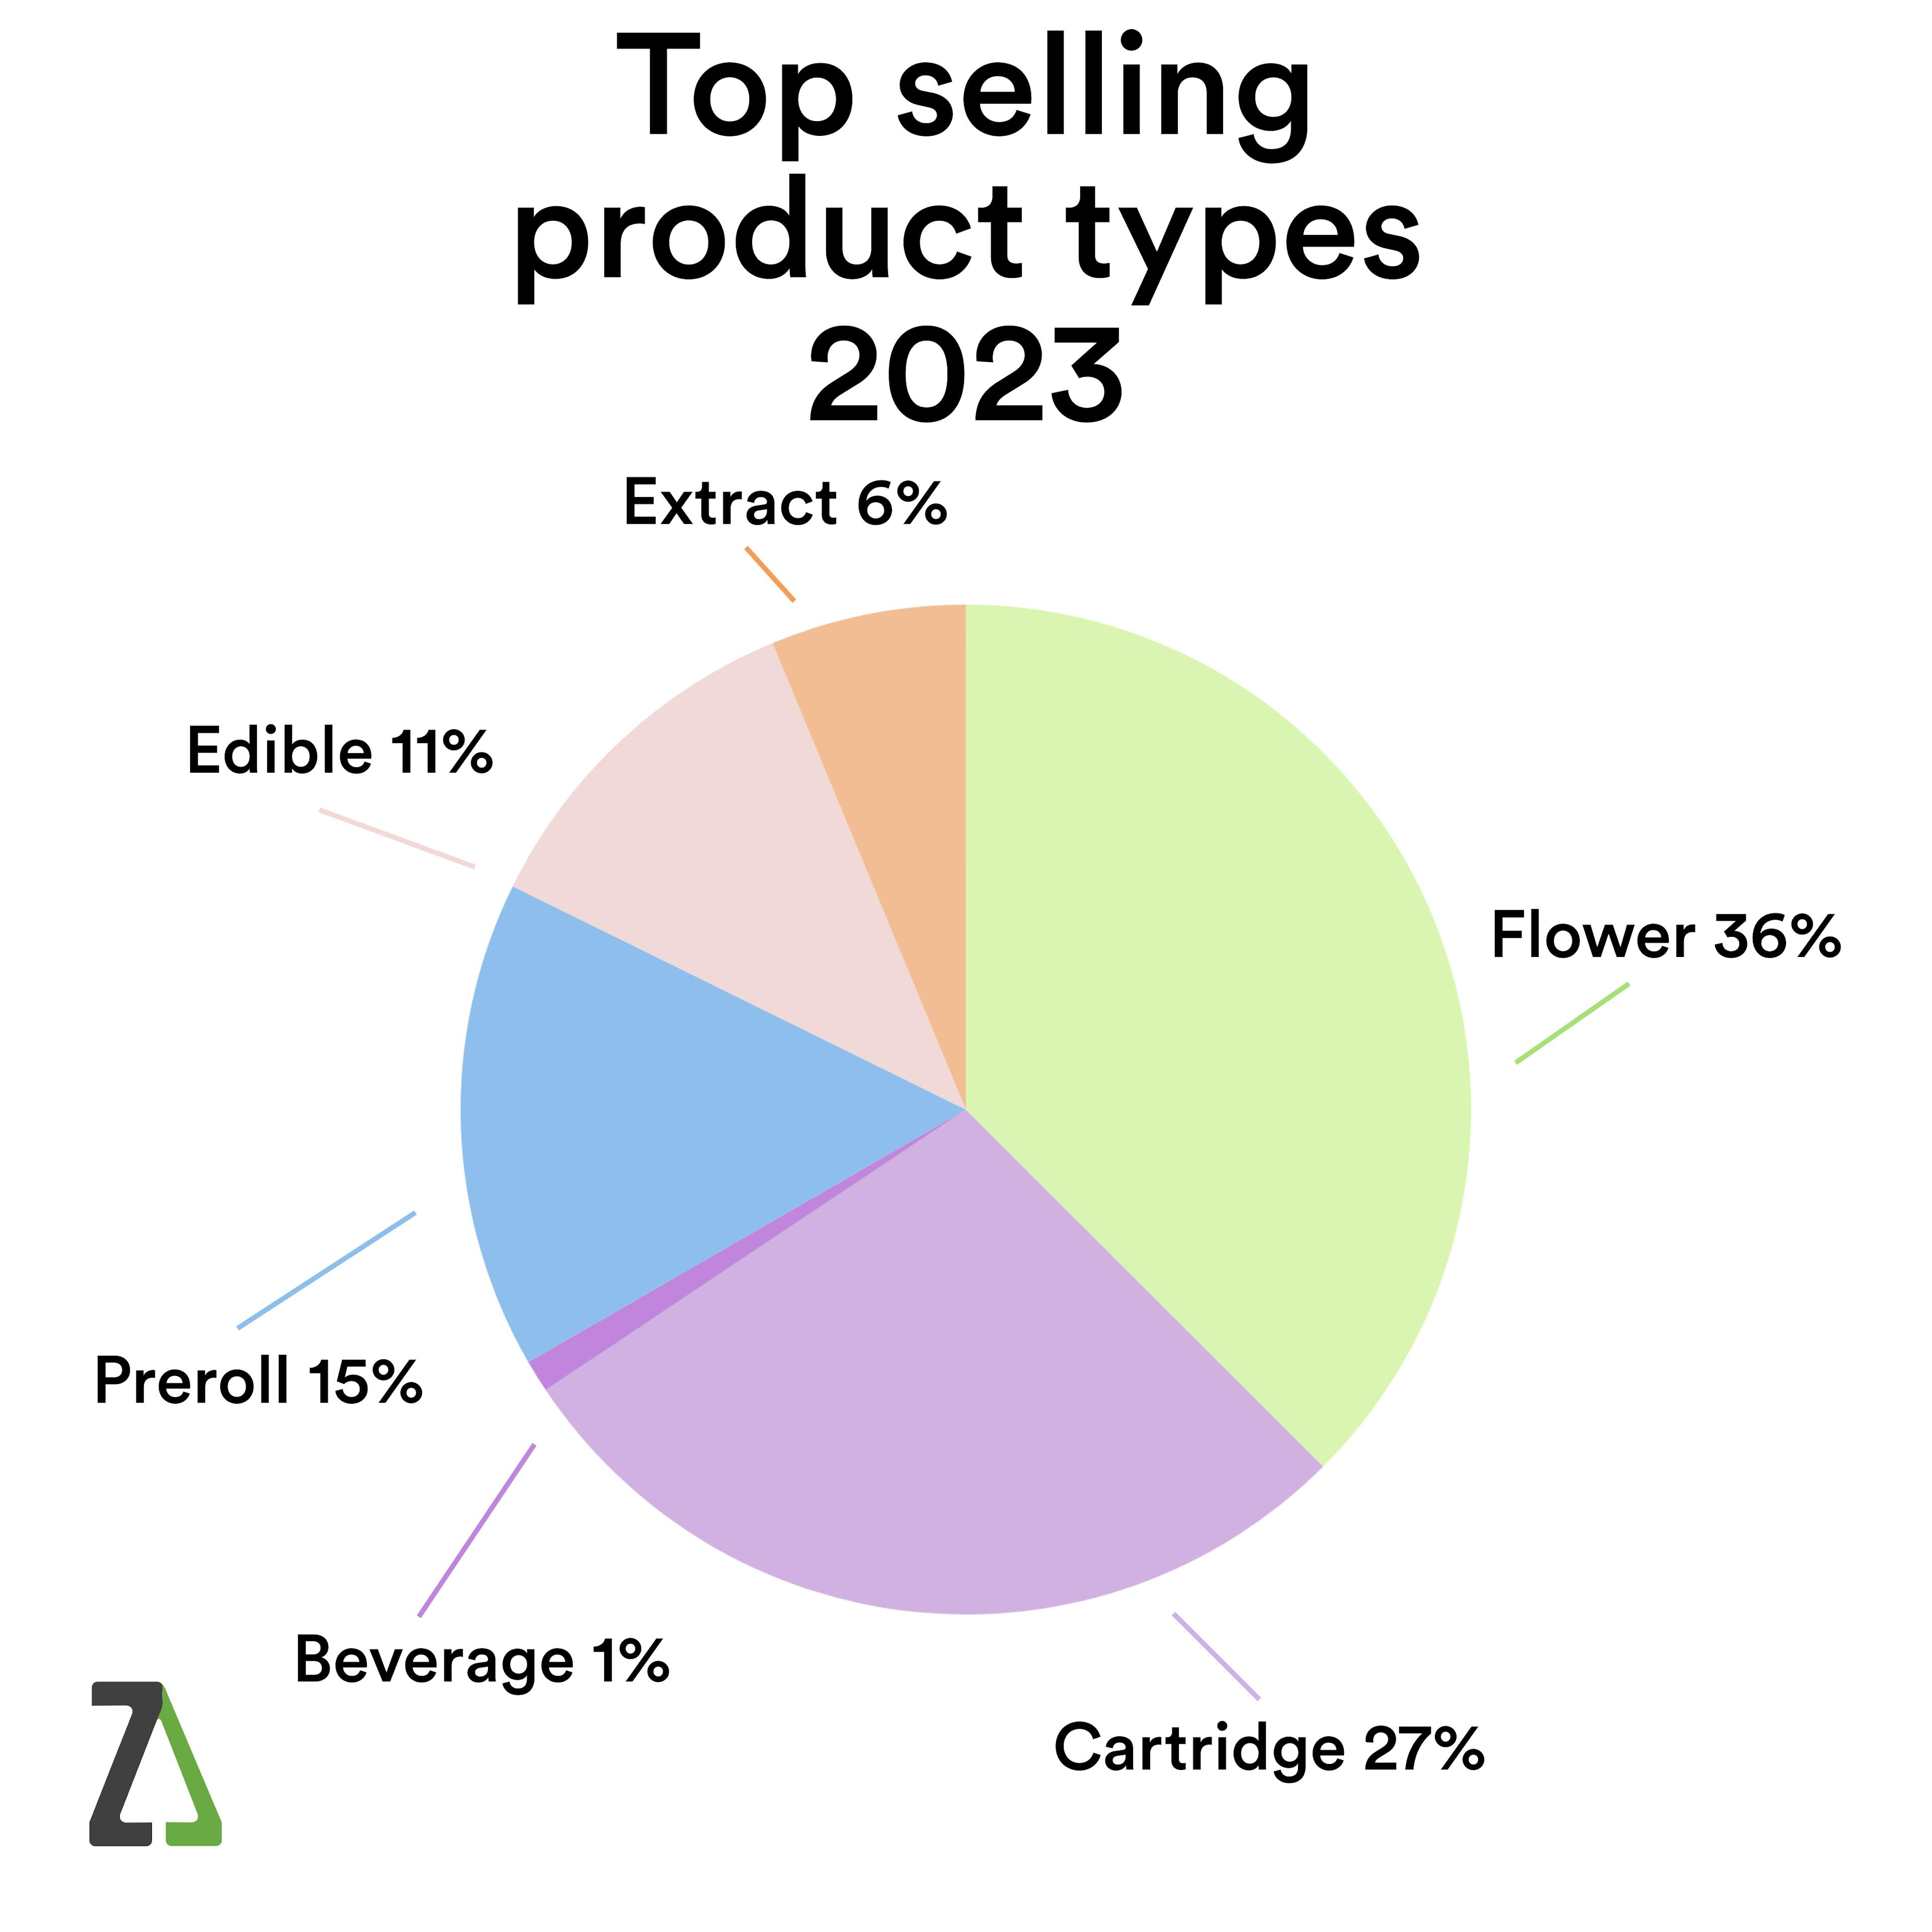 ALT Text: "Pie chart titled 'Top selling product types 2023' with market share percentages: Flower 36%, Cartridge 27%, Preroll 15%, Edible 11%, Extract 6%, and Beverage 1%. The chart is color-coded and includes the TREEZ logo at the bottom